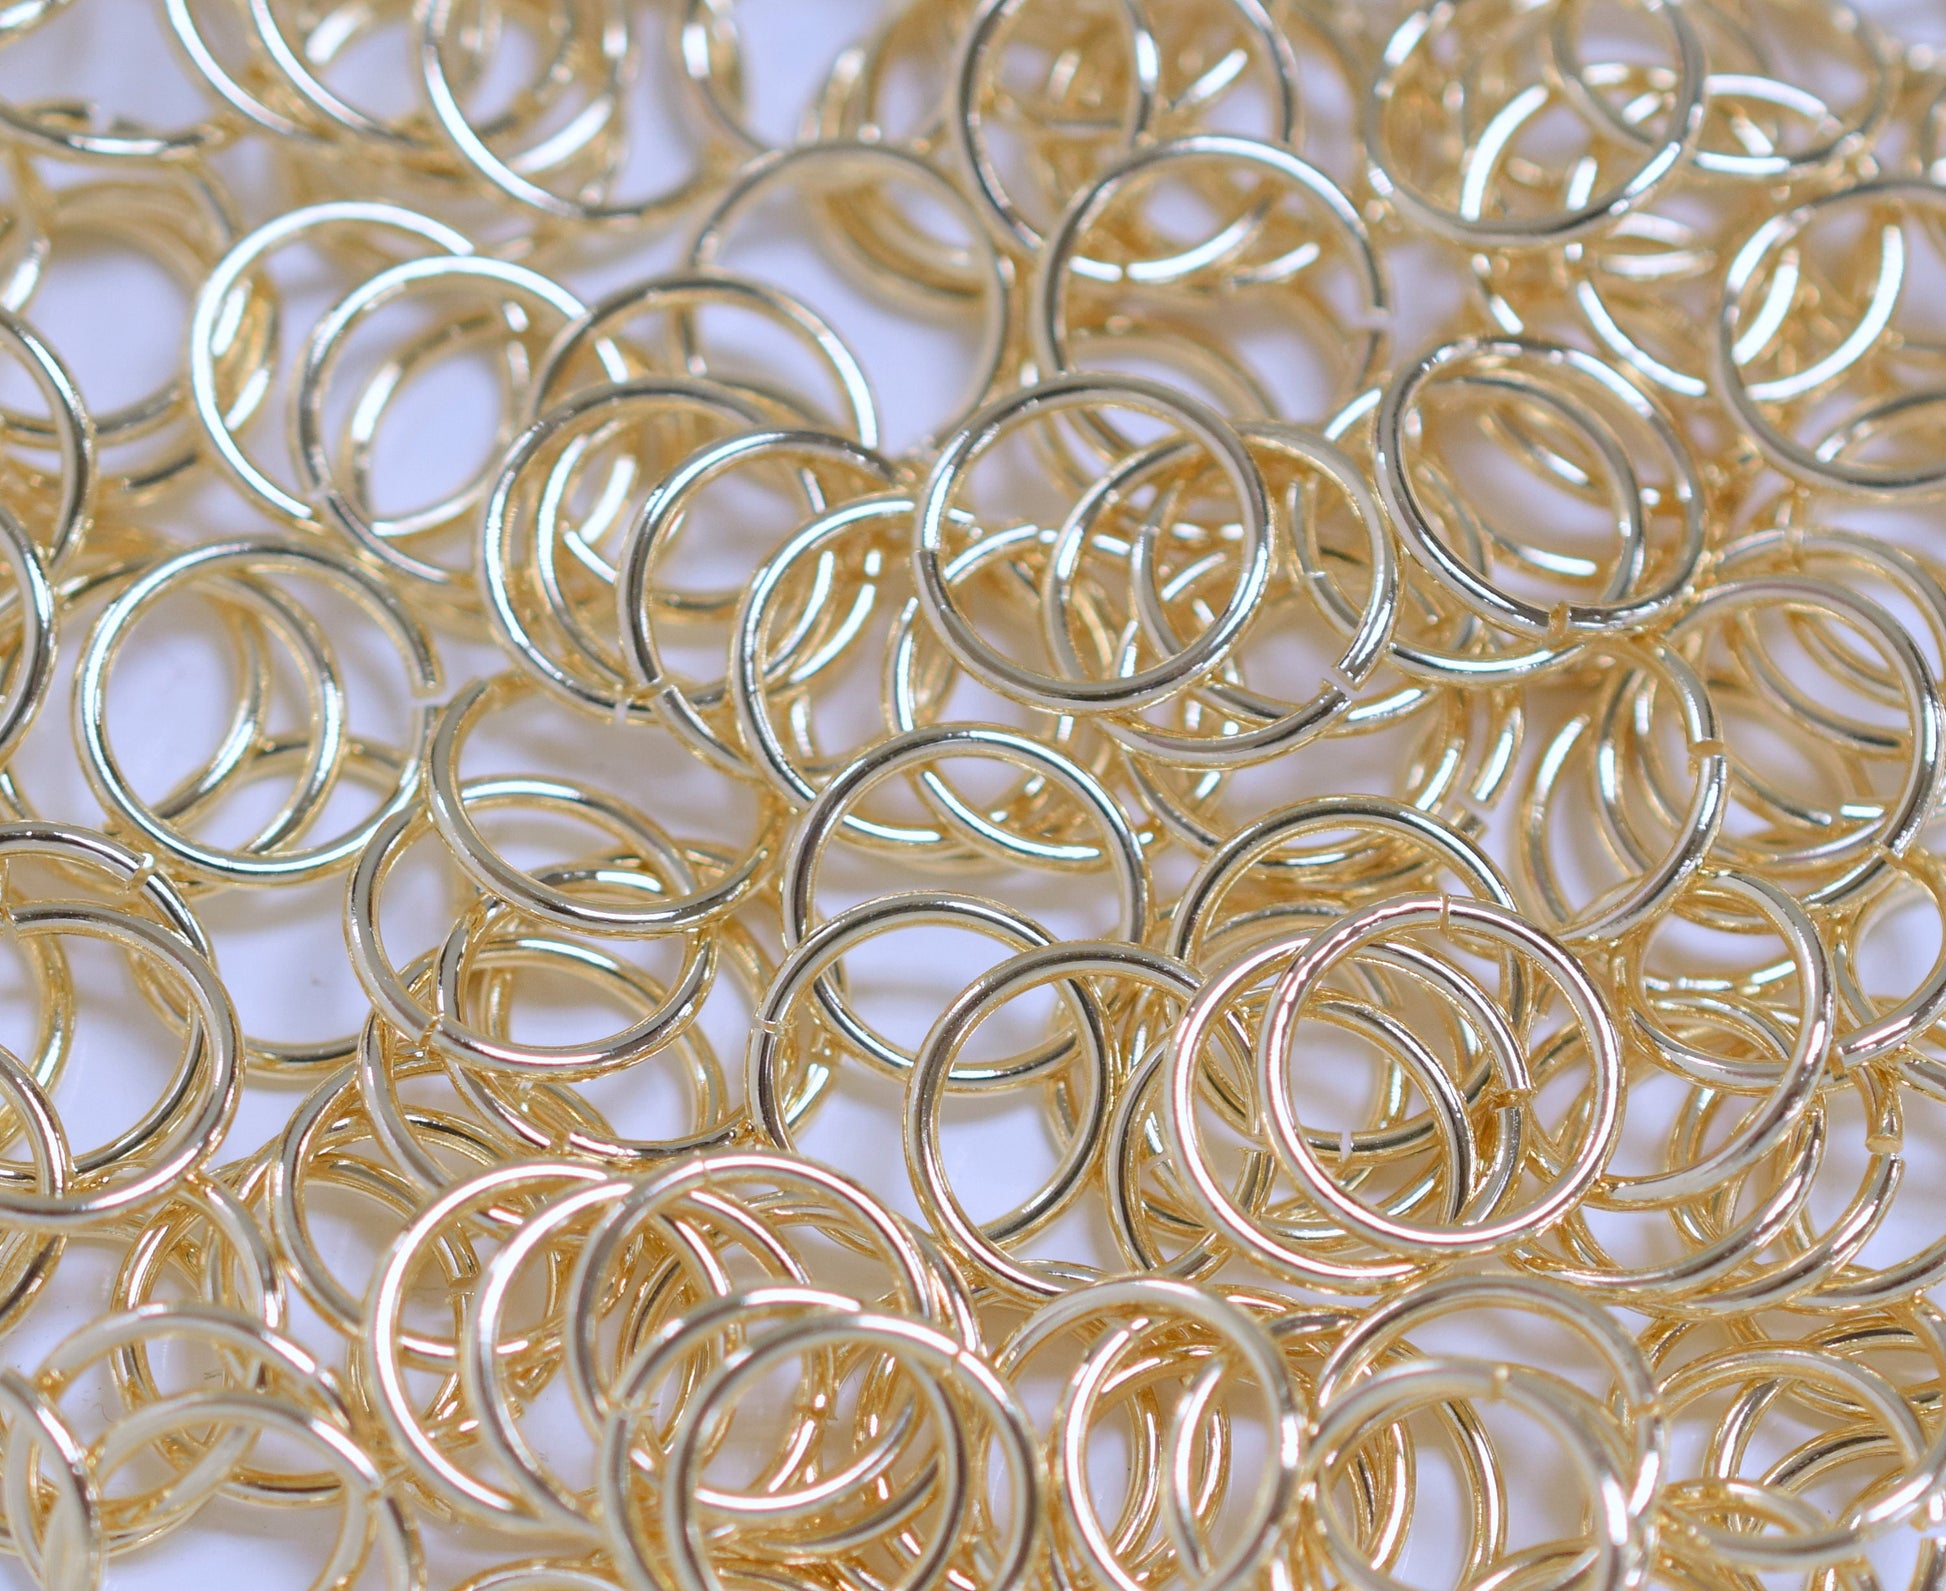 14K Gold Filled Jump Rings Beads Sizes 3mm, 4mm, 5mm, 6mm, 8mm, 10mm, 12mm  Spacer Findings Jewelry USA Open/Closed - BeadsFindingDepot